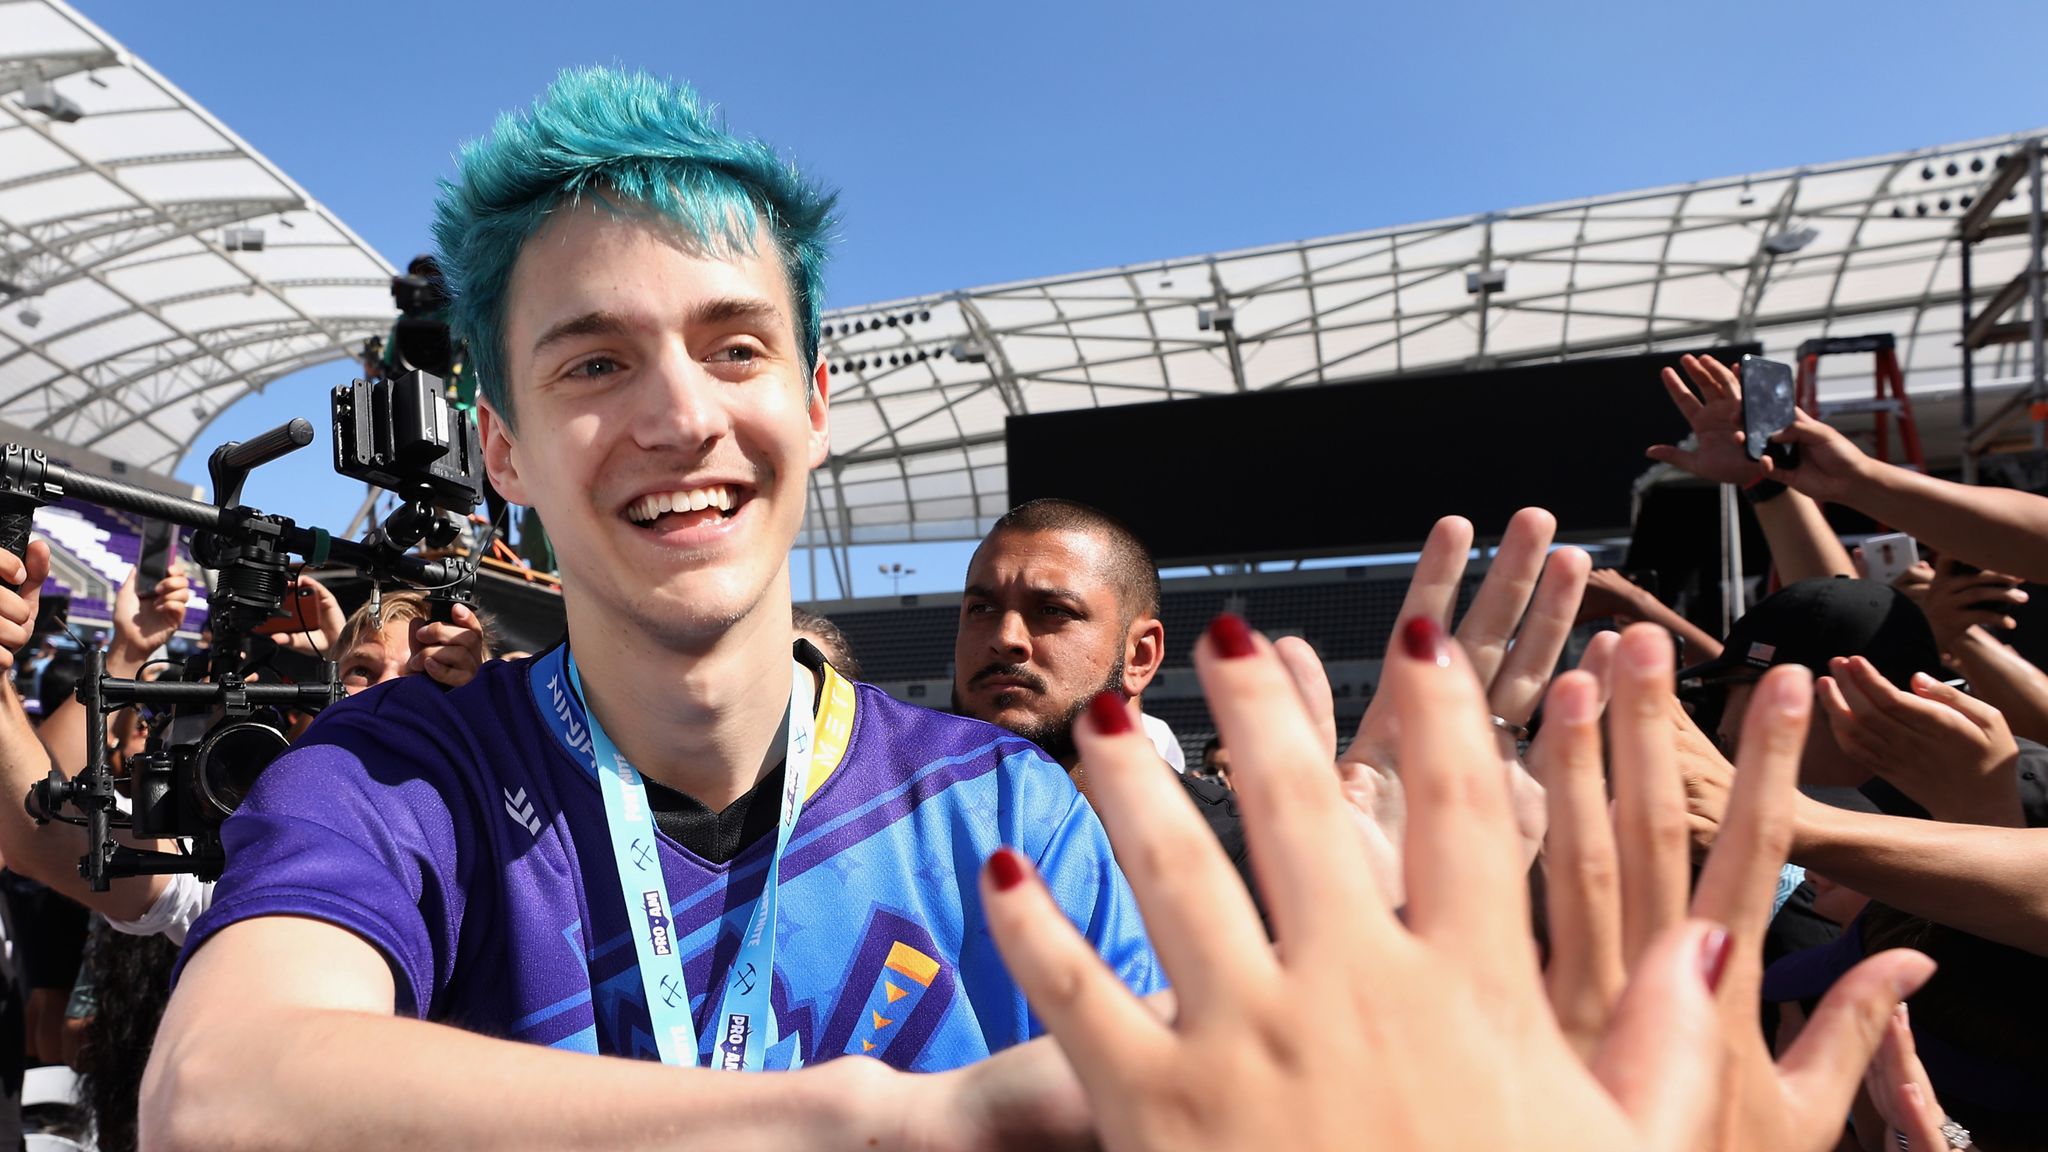 Fortnite Streamer Ninja Disgusted As Dormant Twitch Page Promotes Porn Science Tech News Sky News